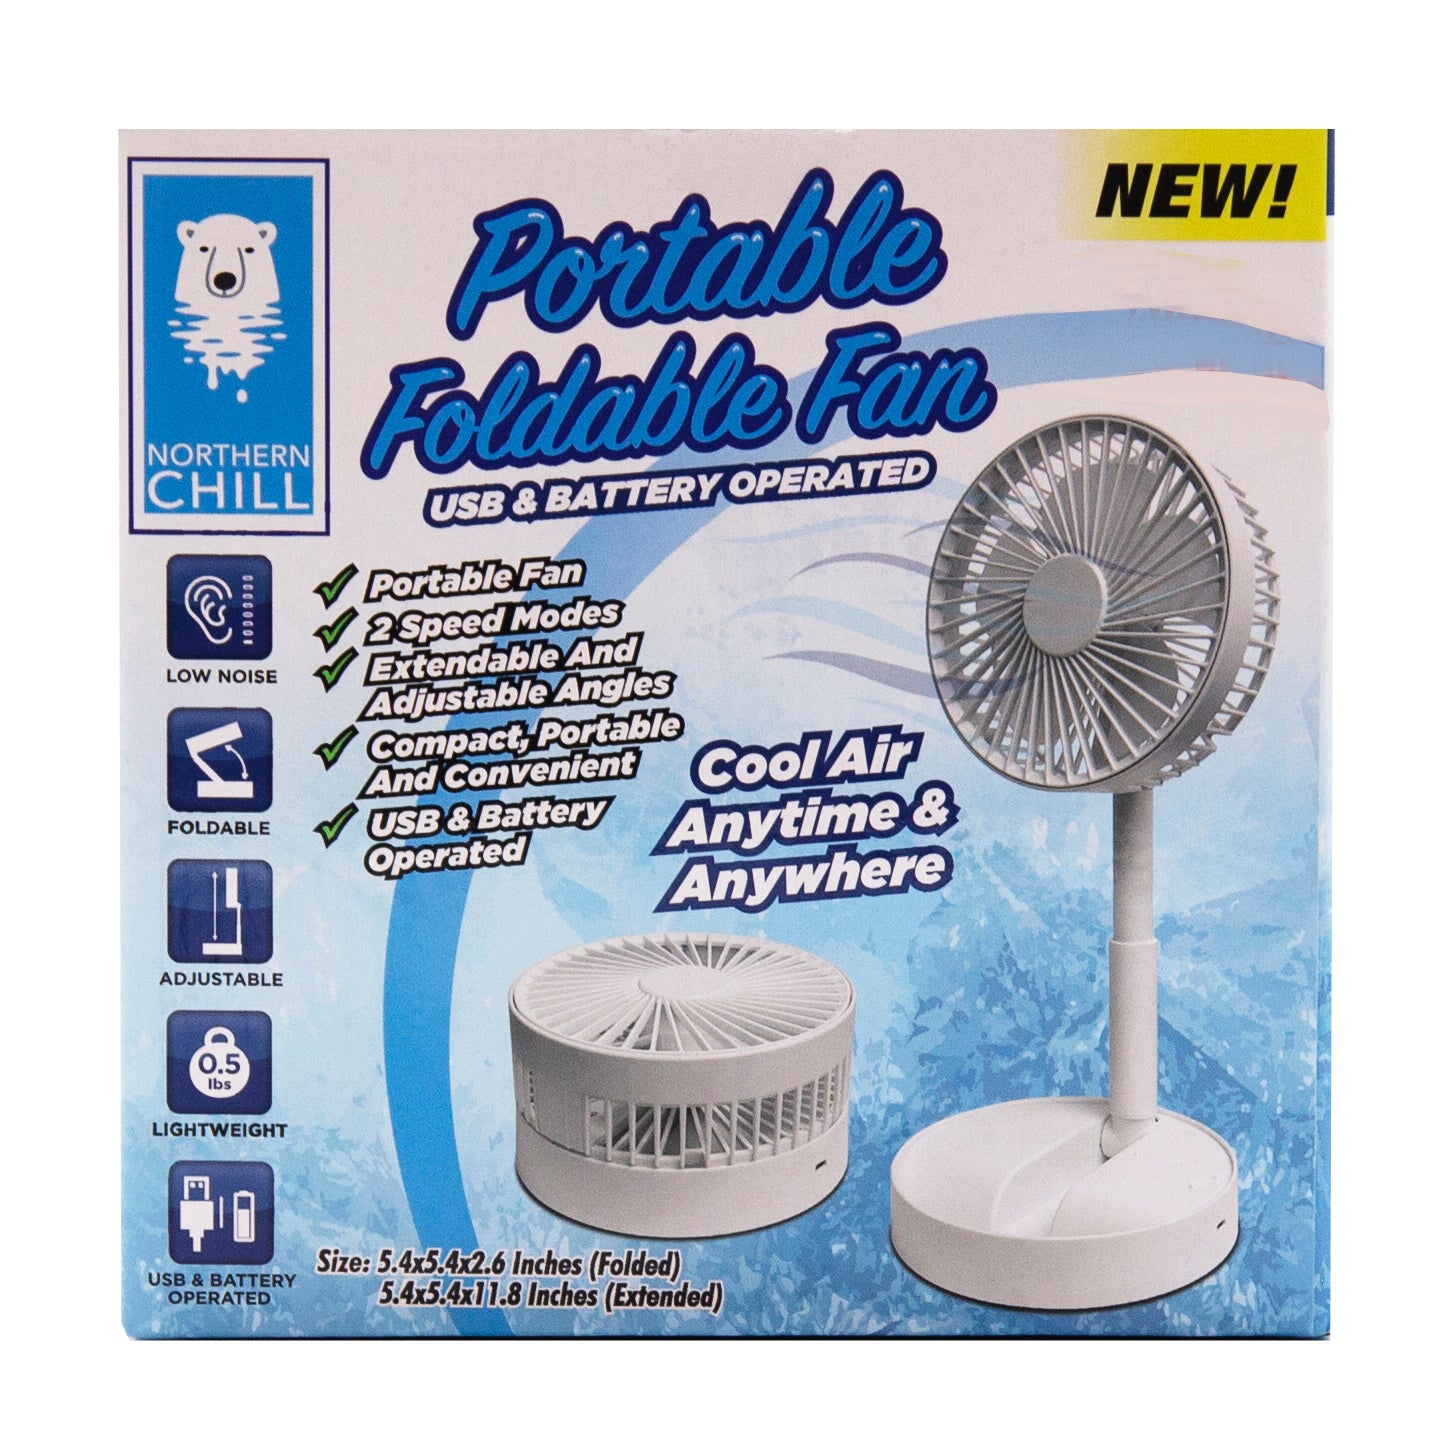 Northern Chill Portable Foldable Fan Cool Air Anytime & Anywhere - As Seen On TV